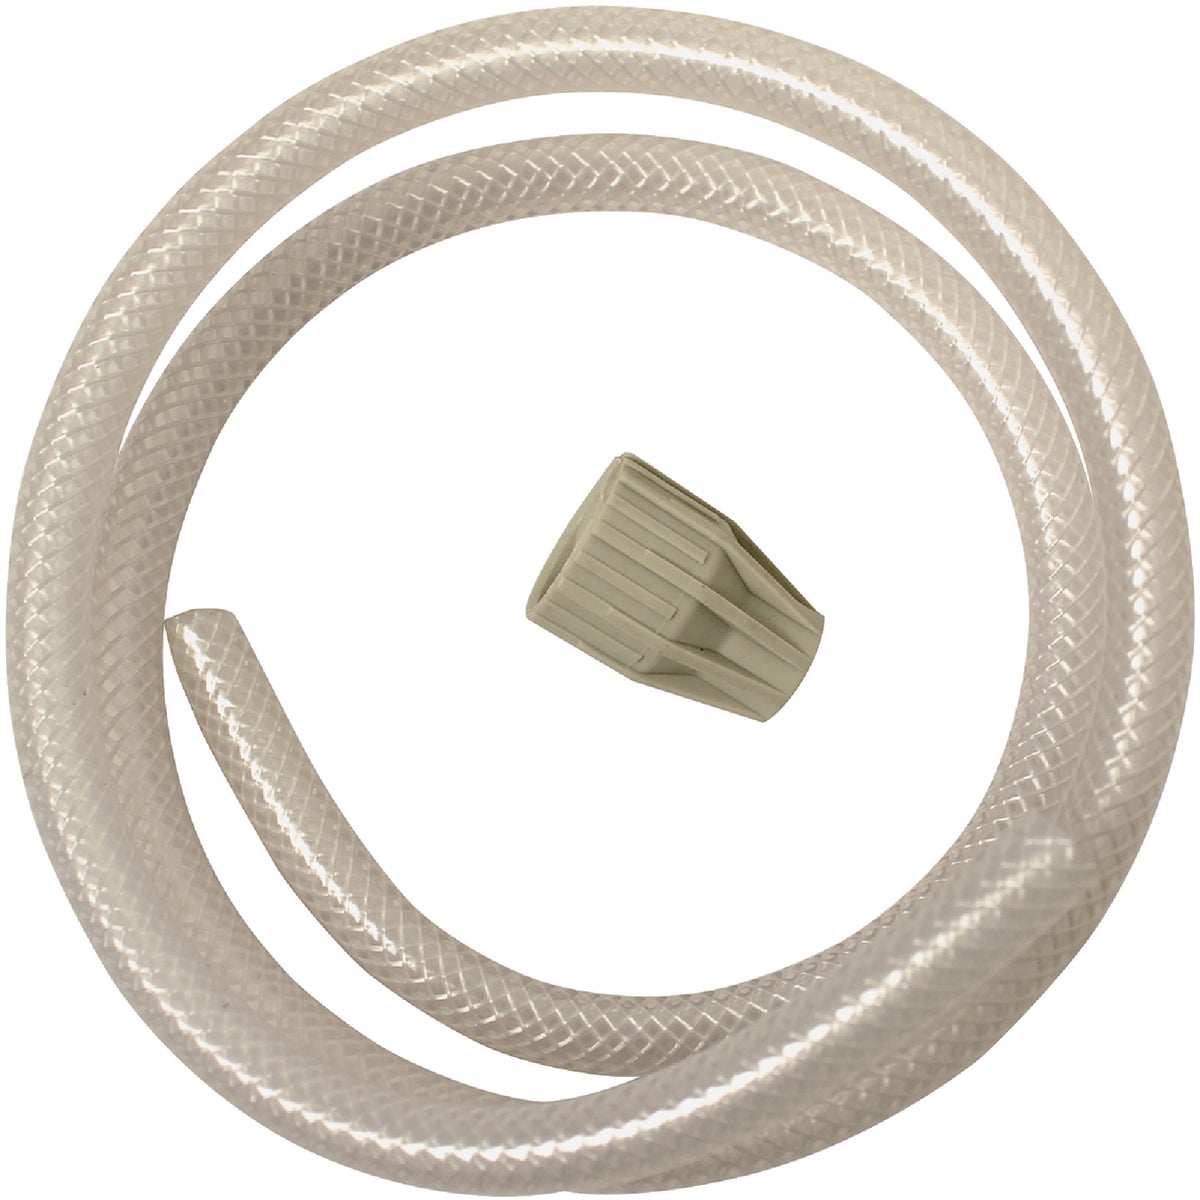 Item 703792, Replacement hose kit includes: clear reinforced hose, retainer nut 